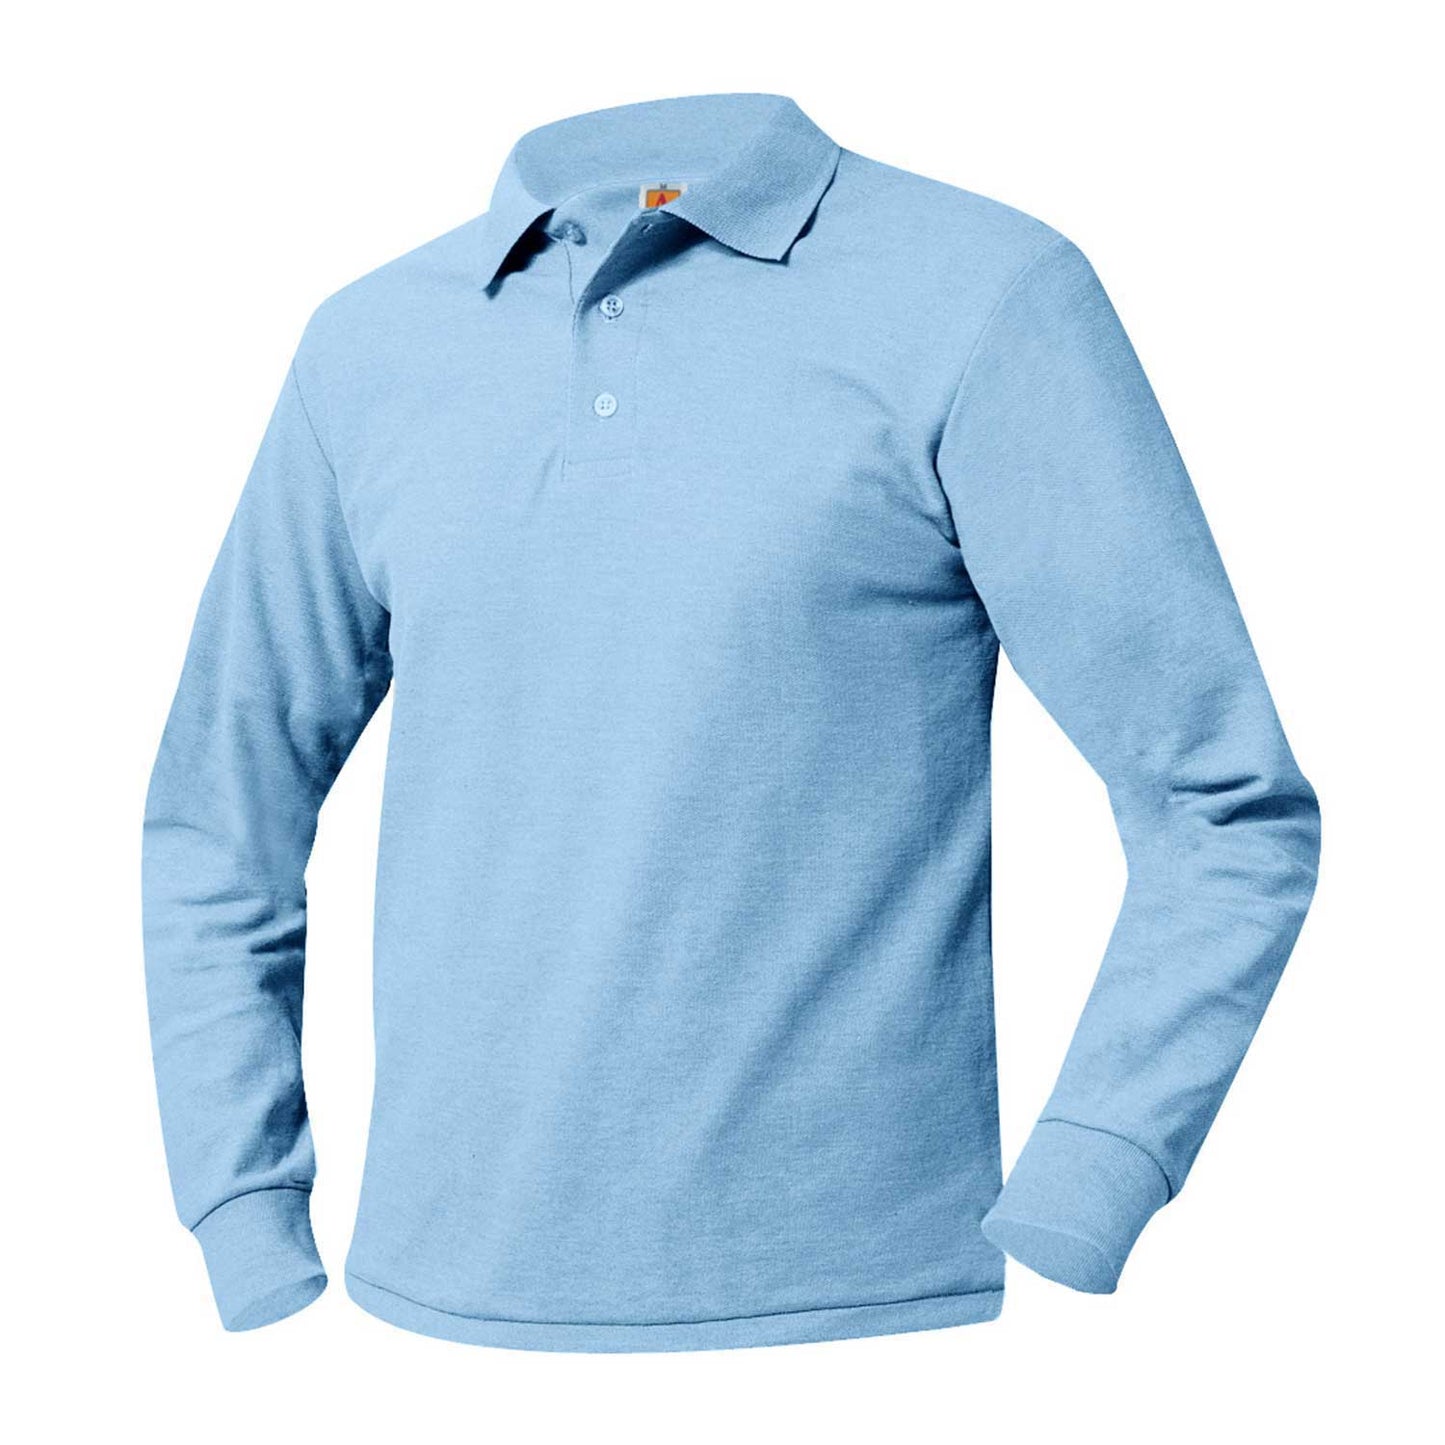 Men's/Unisex Pique Polo Shirt, Long Sleeves, Ribbed Cuffs - 1227